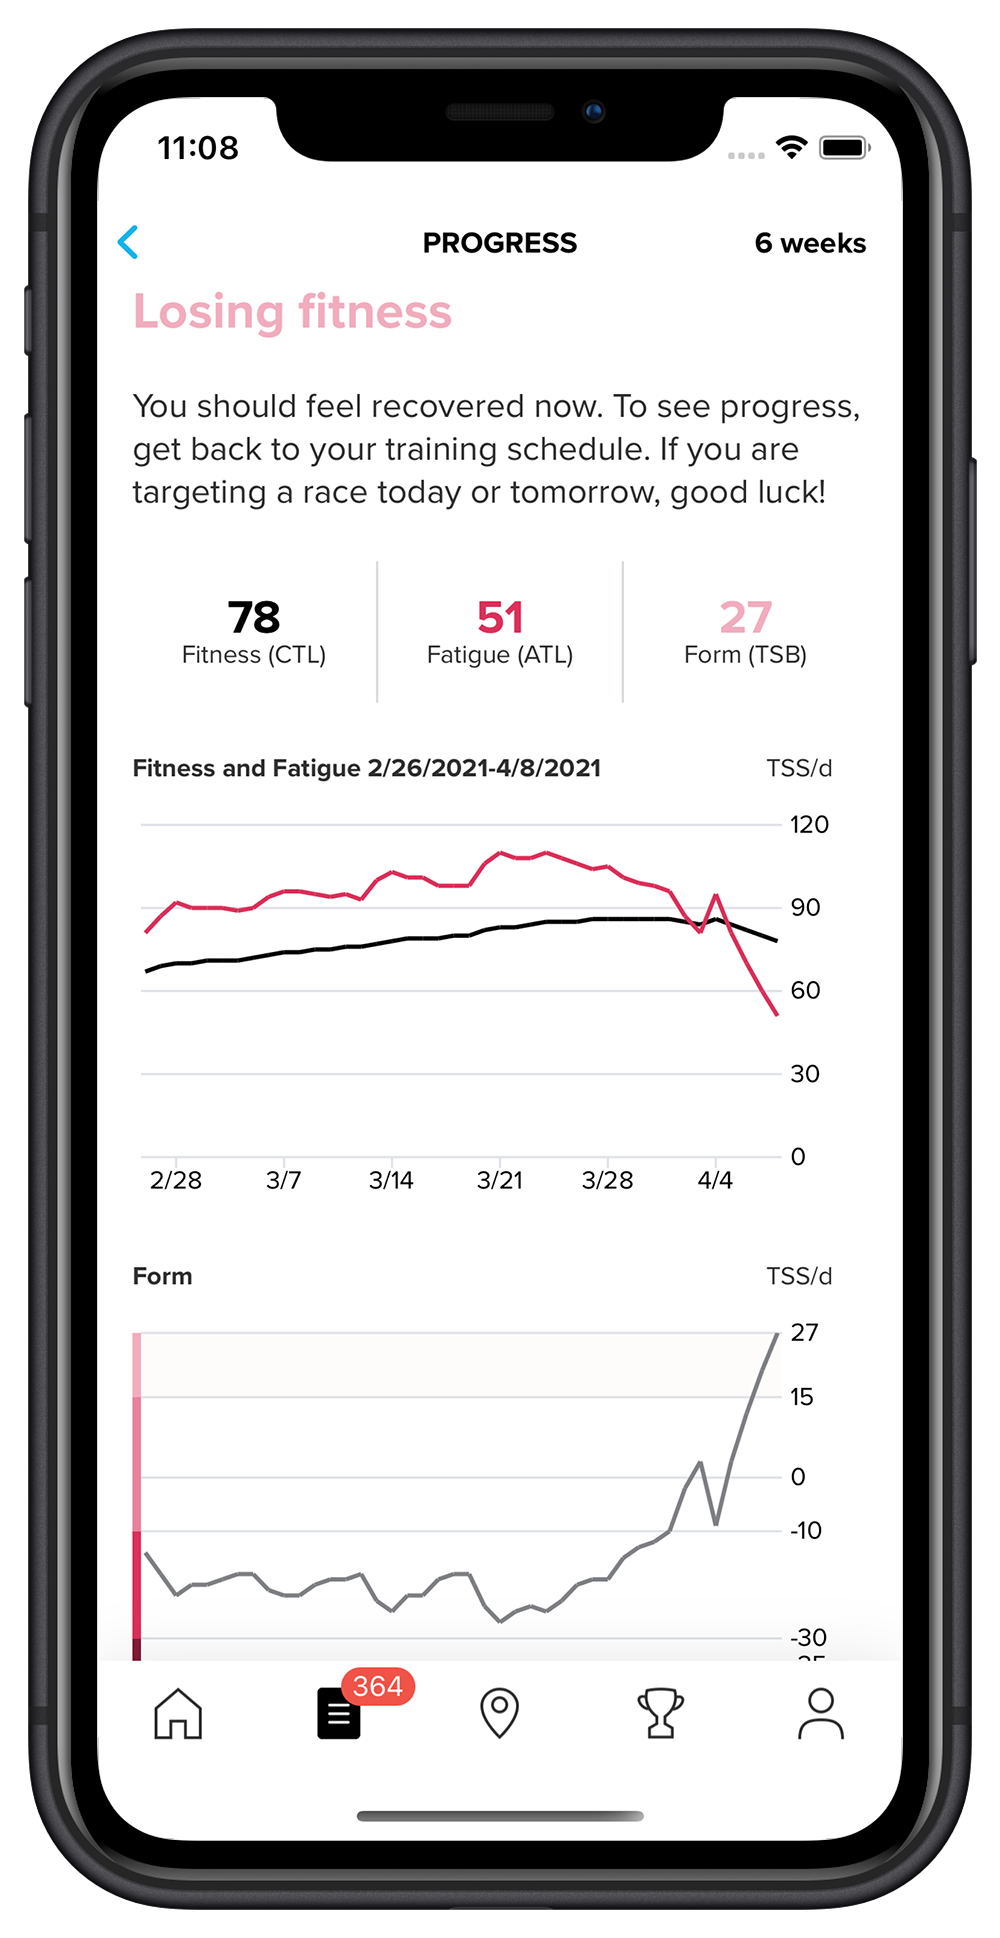 A race preparation example of training load graph in Suunto app